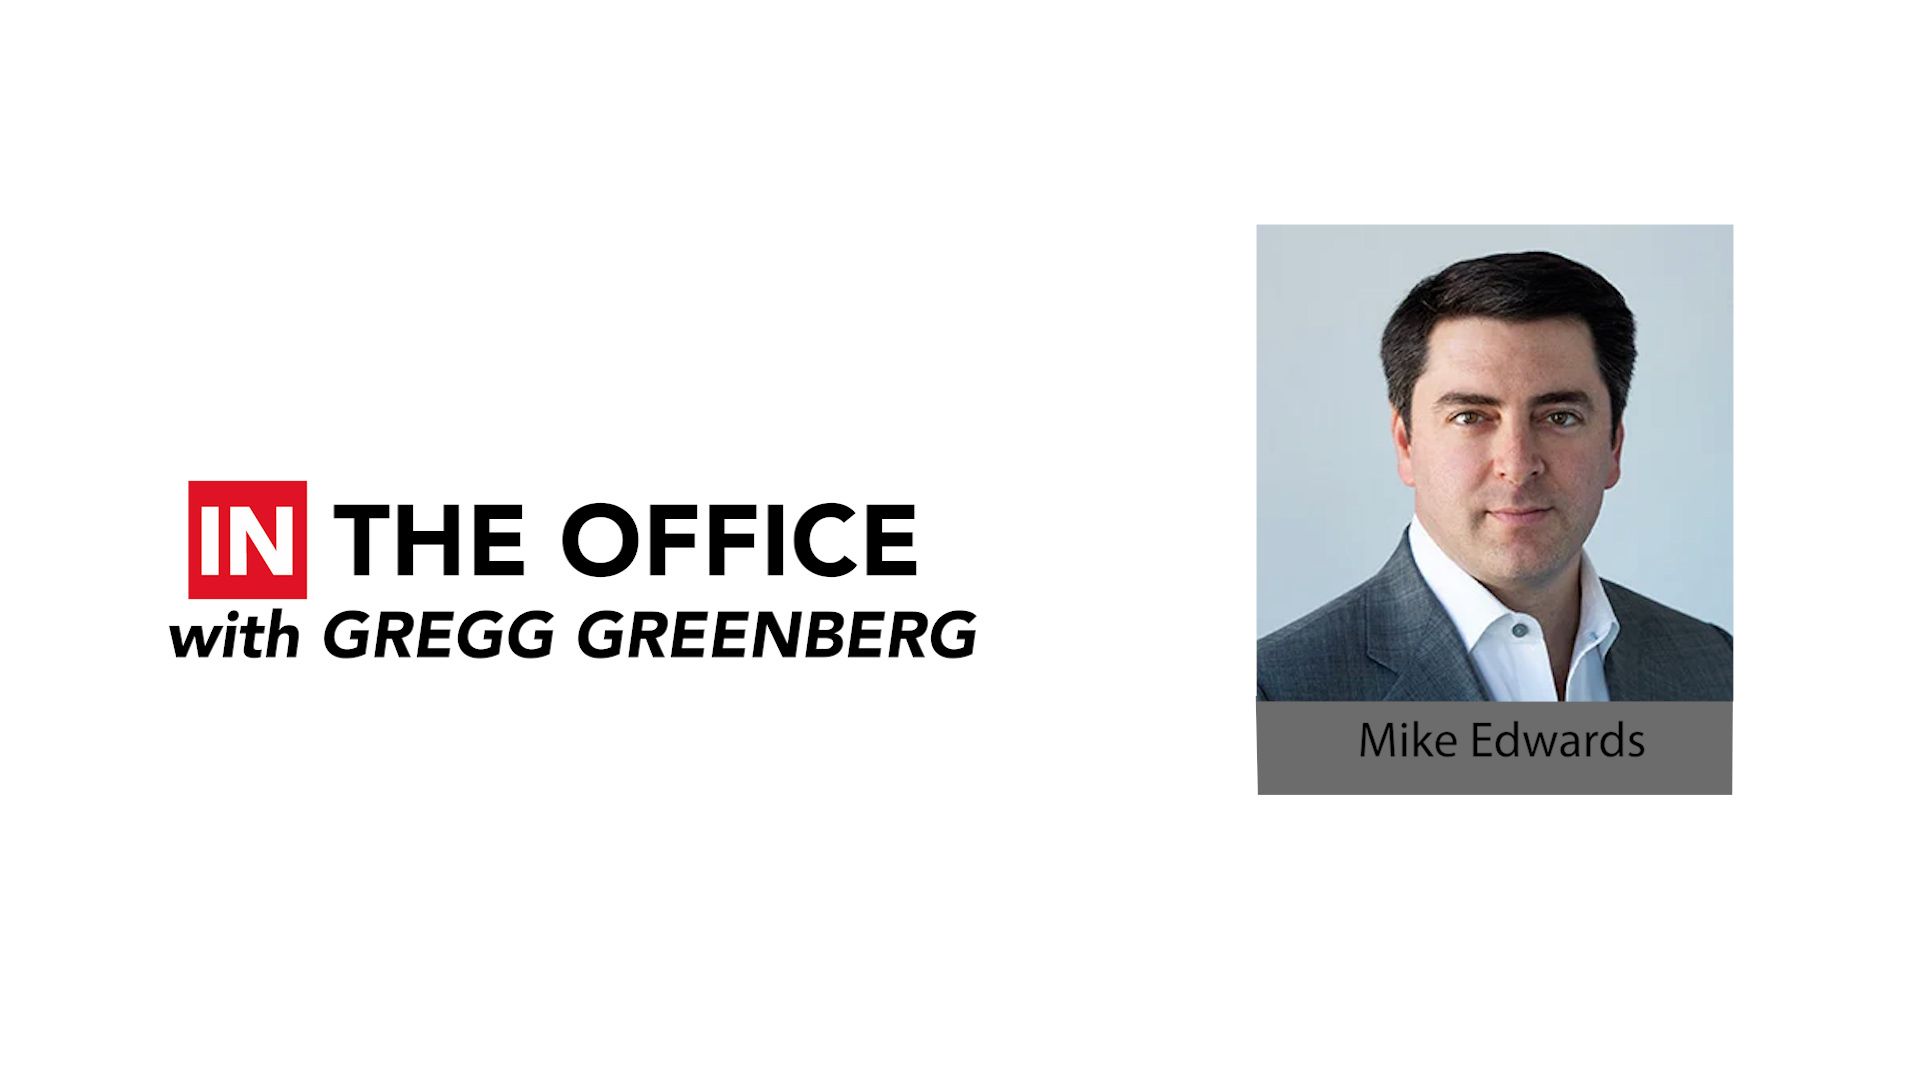 ‘IN the Office’ with Mike Edwards, deputy CIO of Weiss Multi-Strategy Advisers